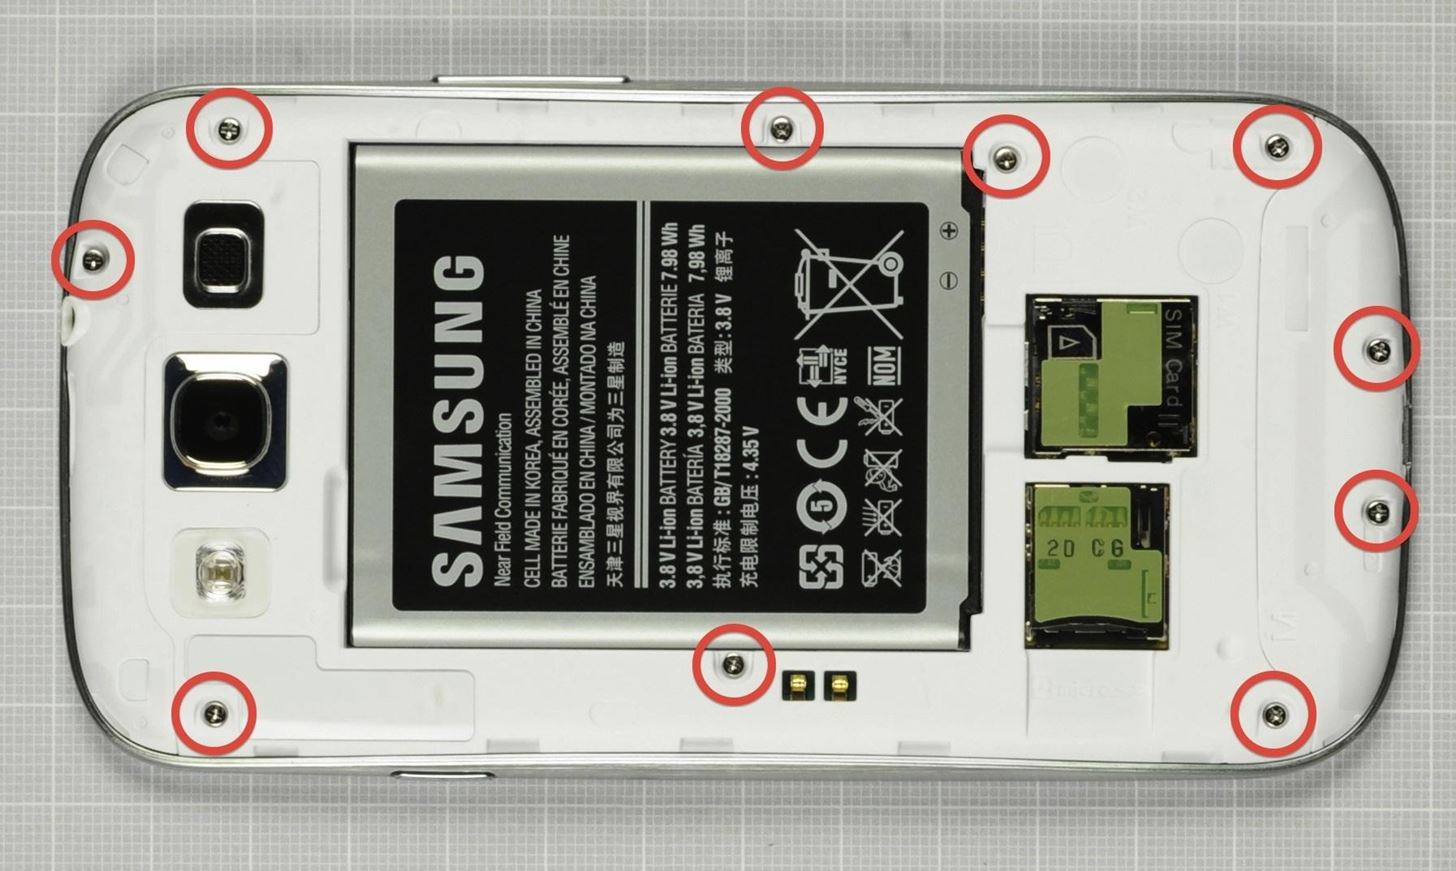 The Super Simple Secret to Fixing Wonky GPS Problems on Your Samsung Galaxy S3